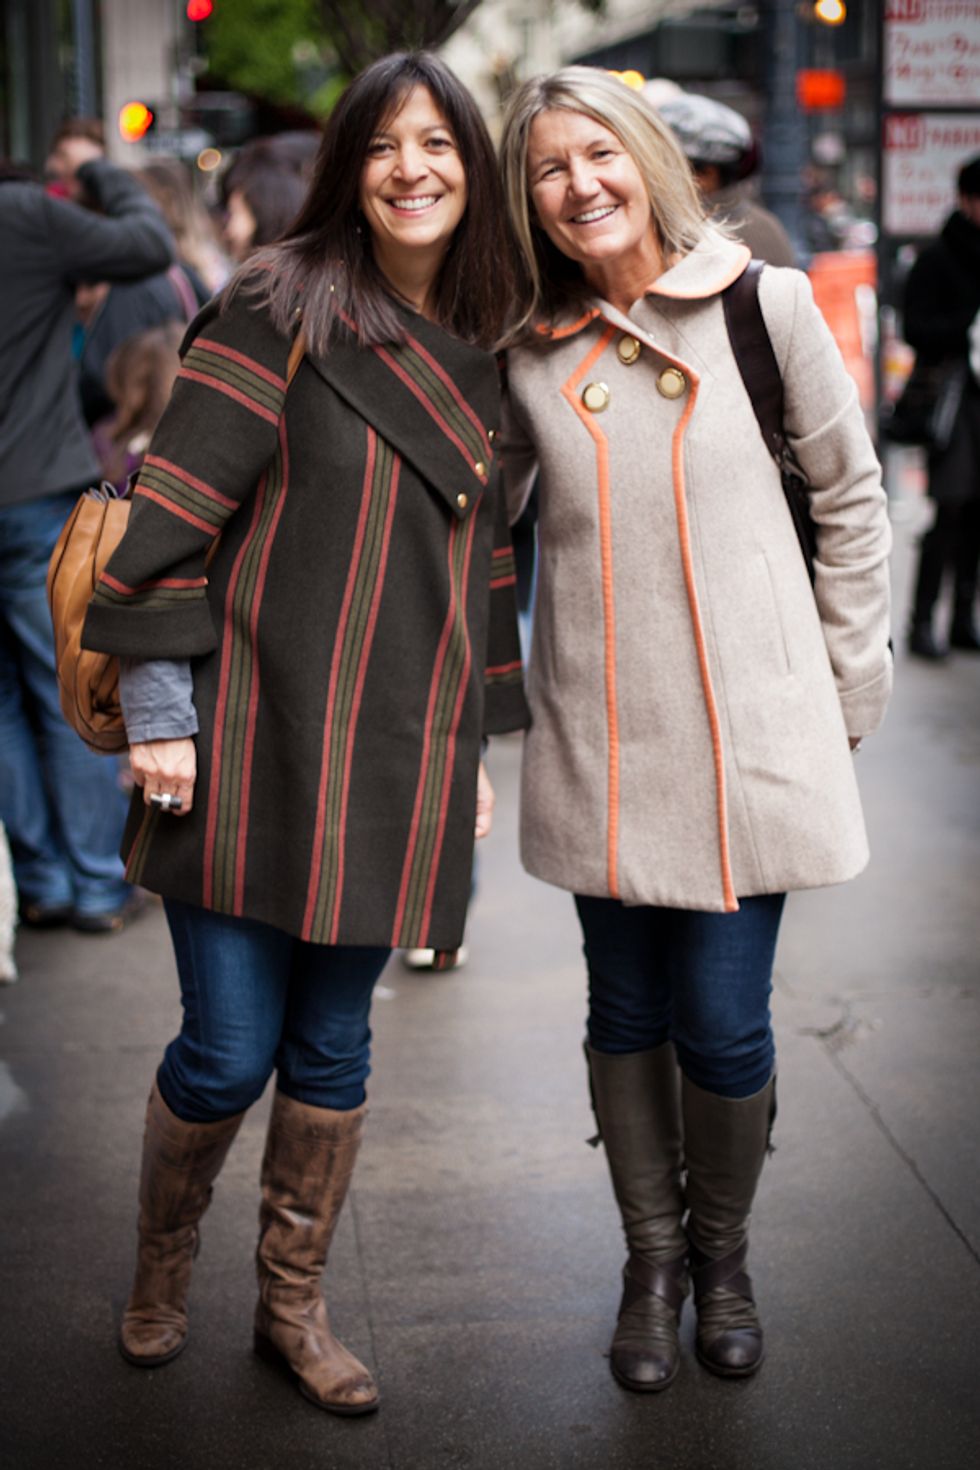 SF Street Style: Two Cold Weather Looks on Market St.